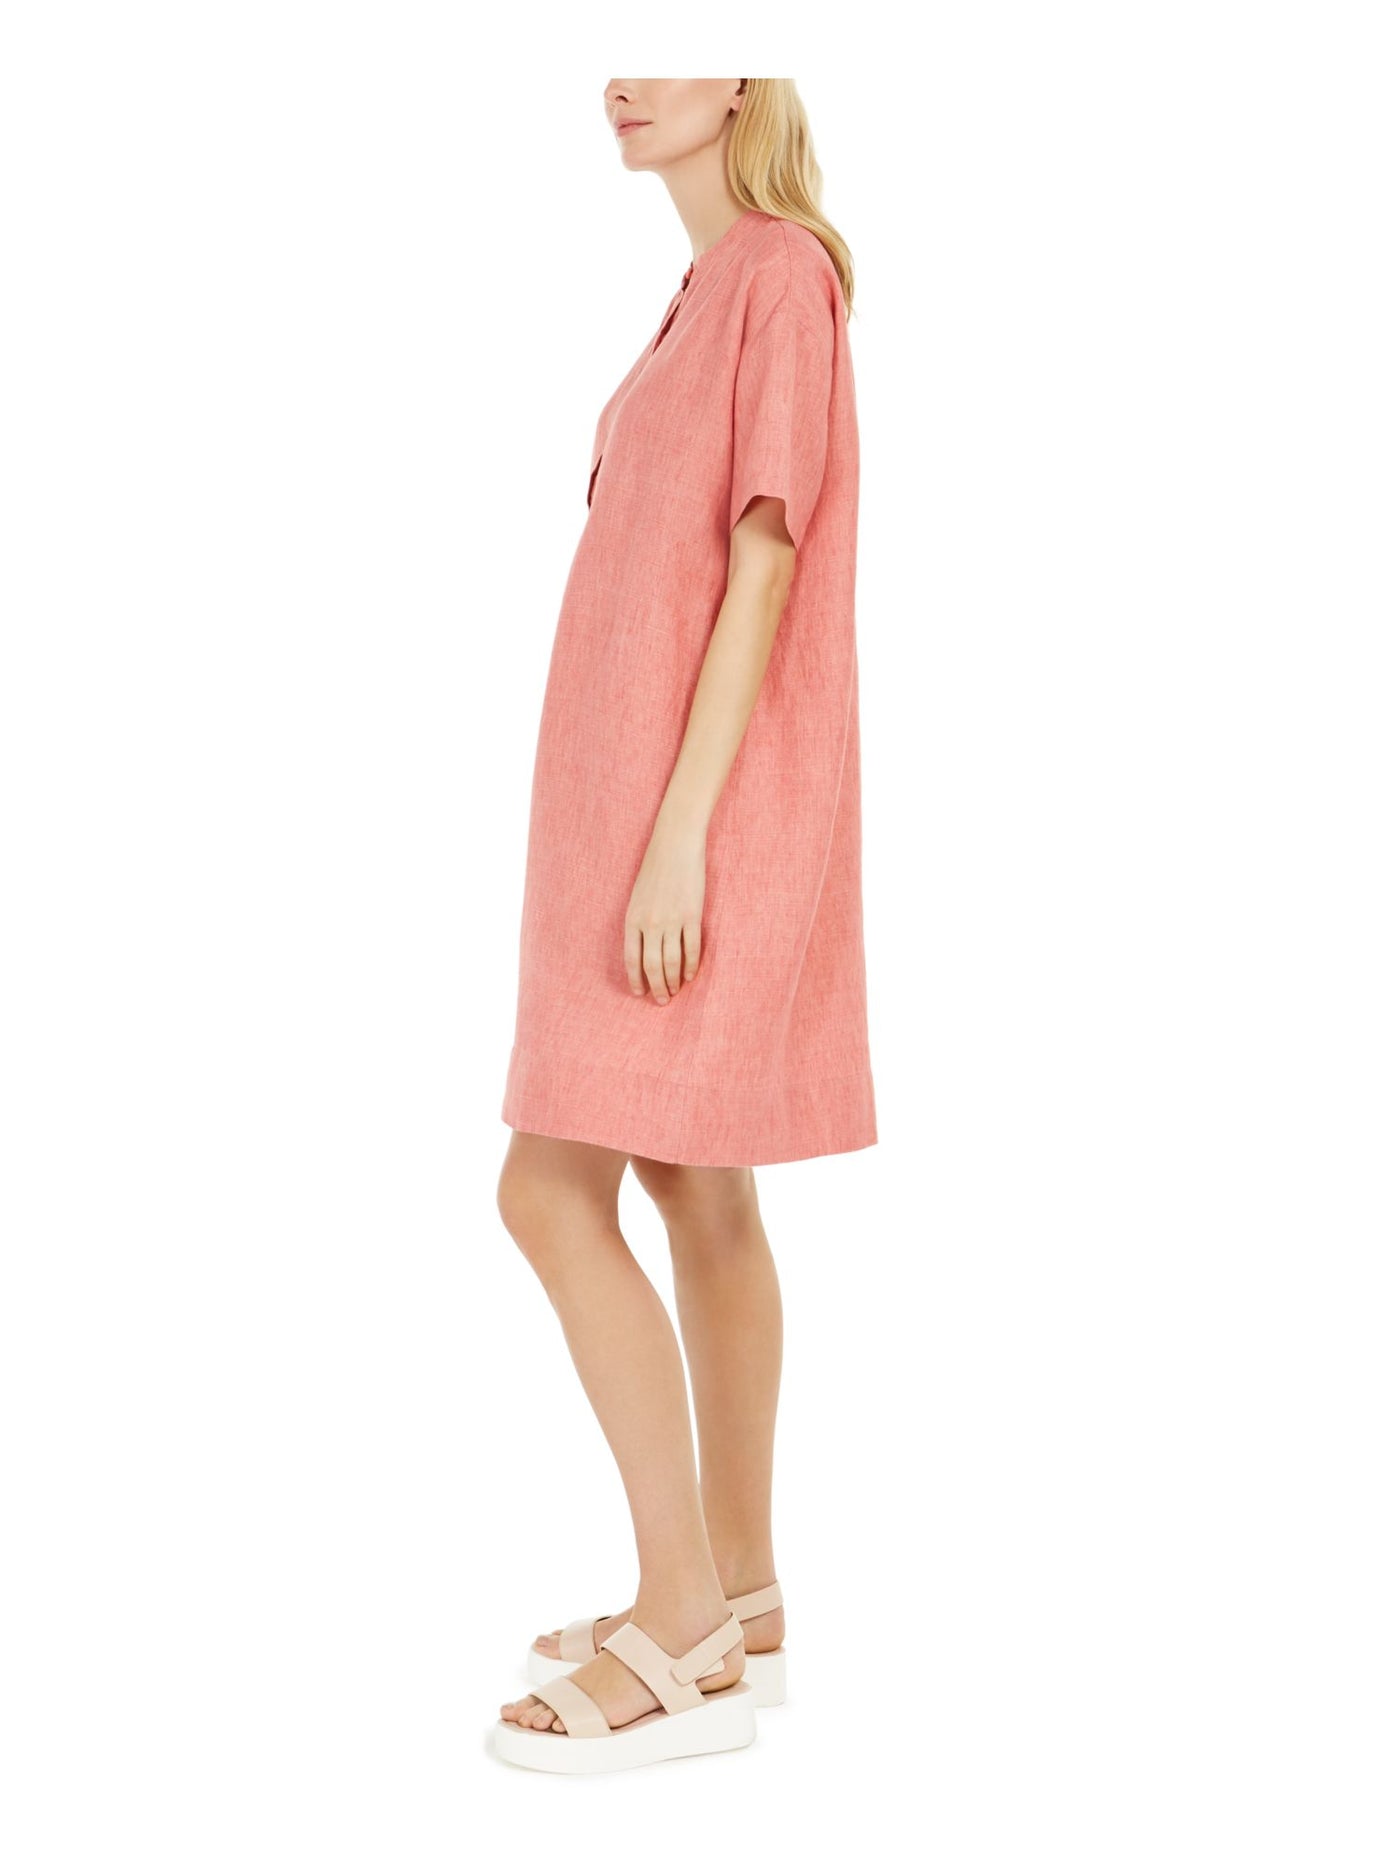 EILEEN FISHER Womens Coral Short Sleeve Crew Neck Above The Knee Shift Dress XS